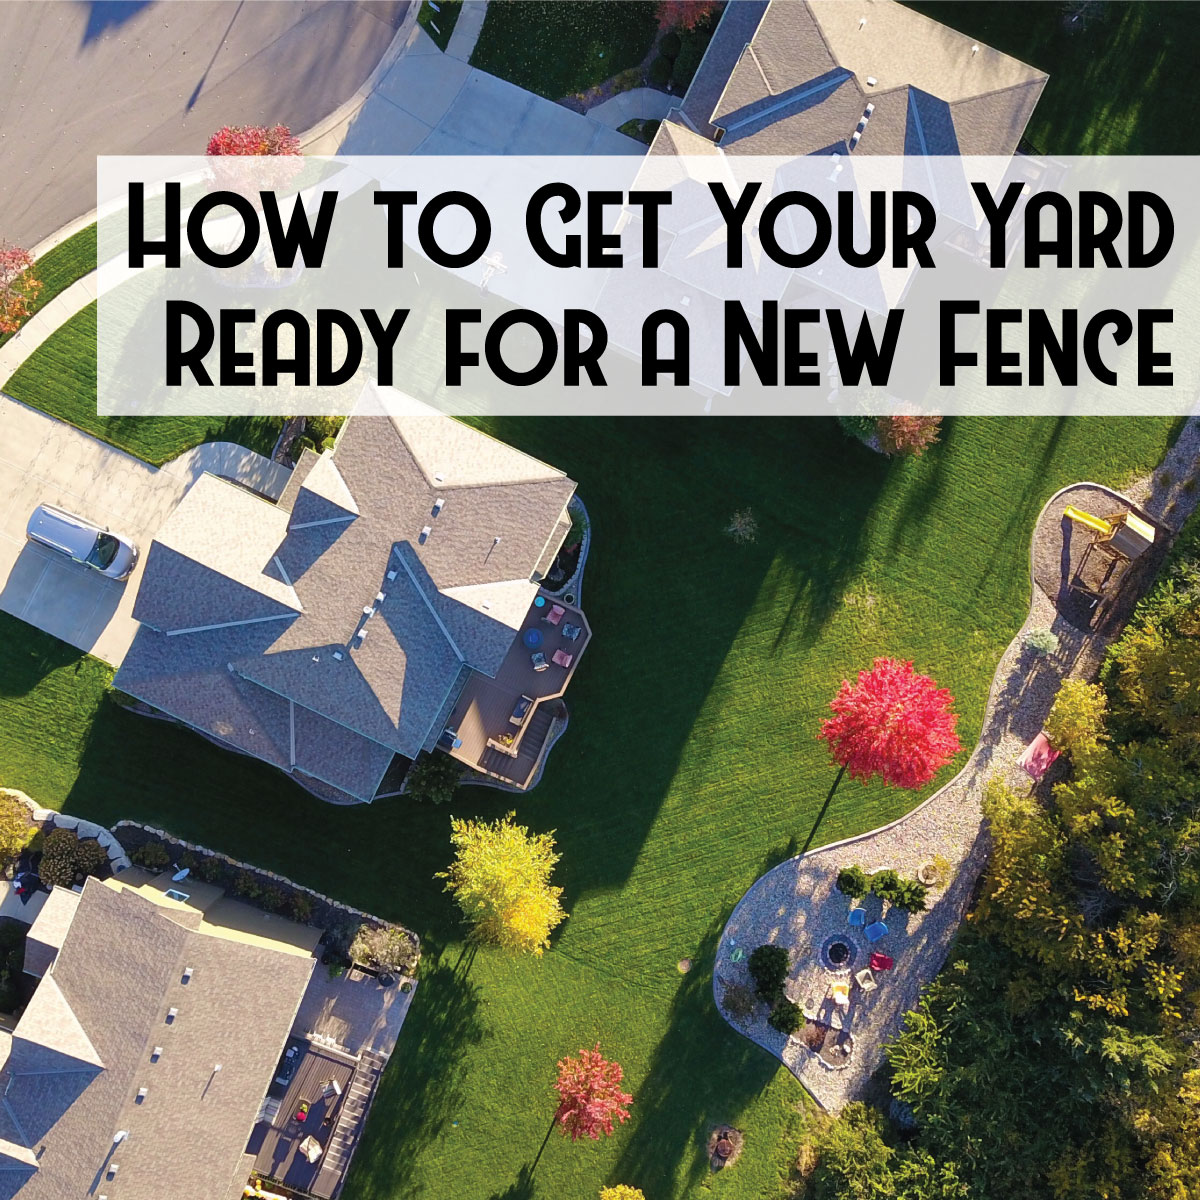 Get Your Yard Ready for a New Fence